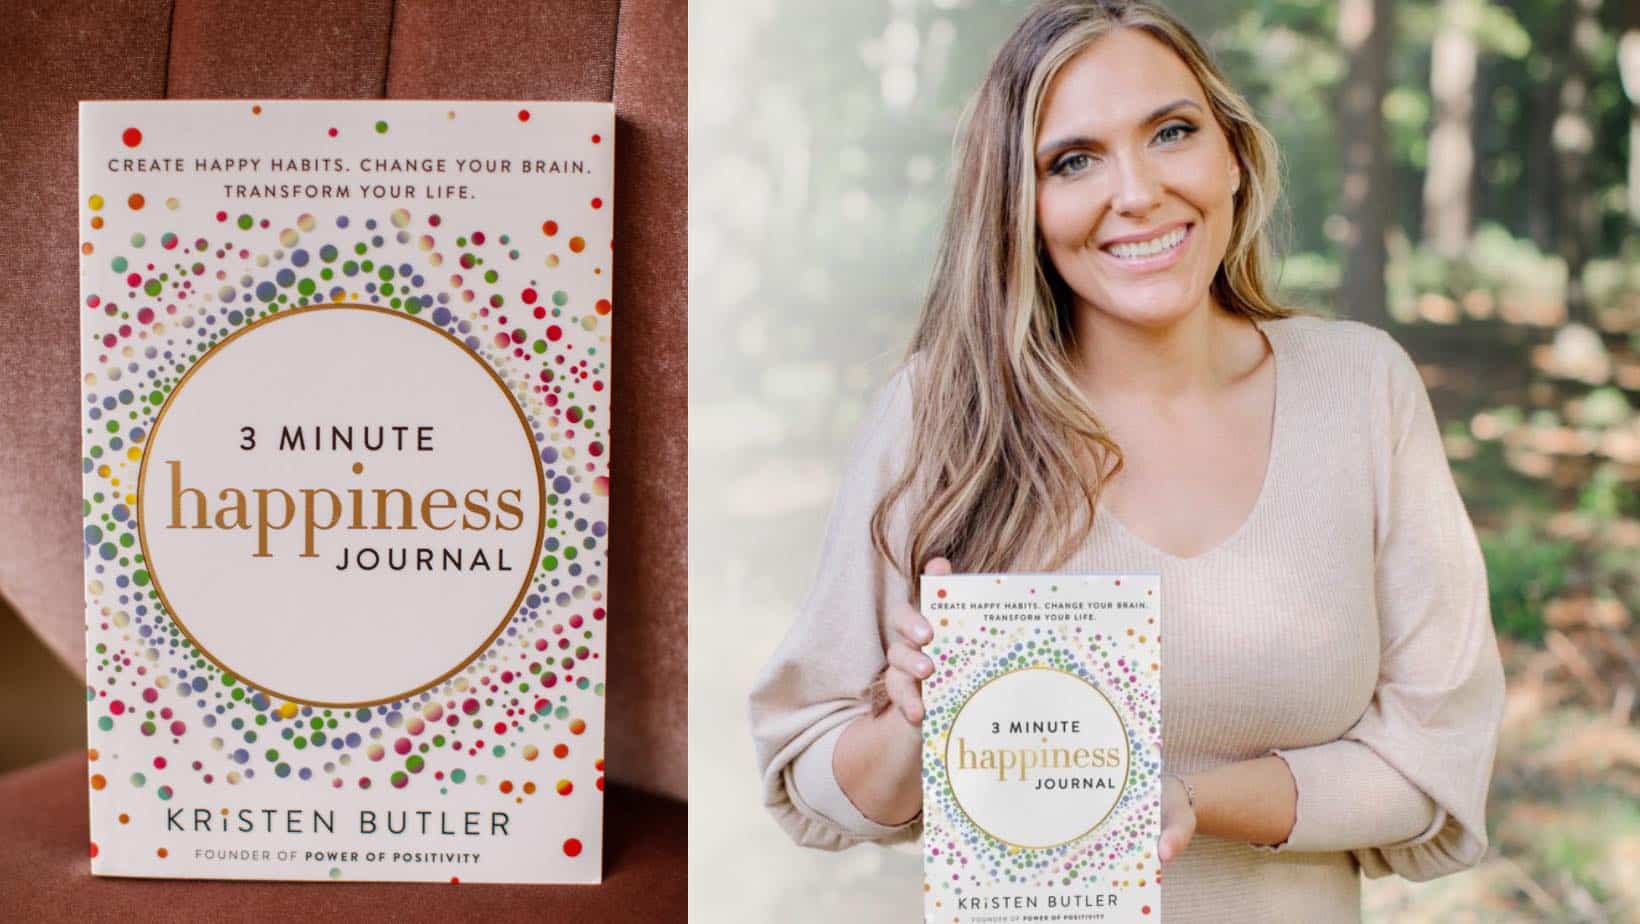 Kristen Butler’s 3 Minute Happiness Journal Included In Official GRAMMY® Gift Bag